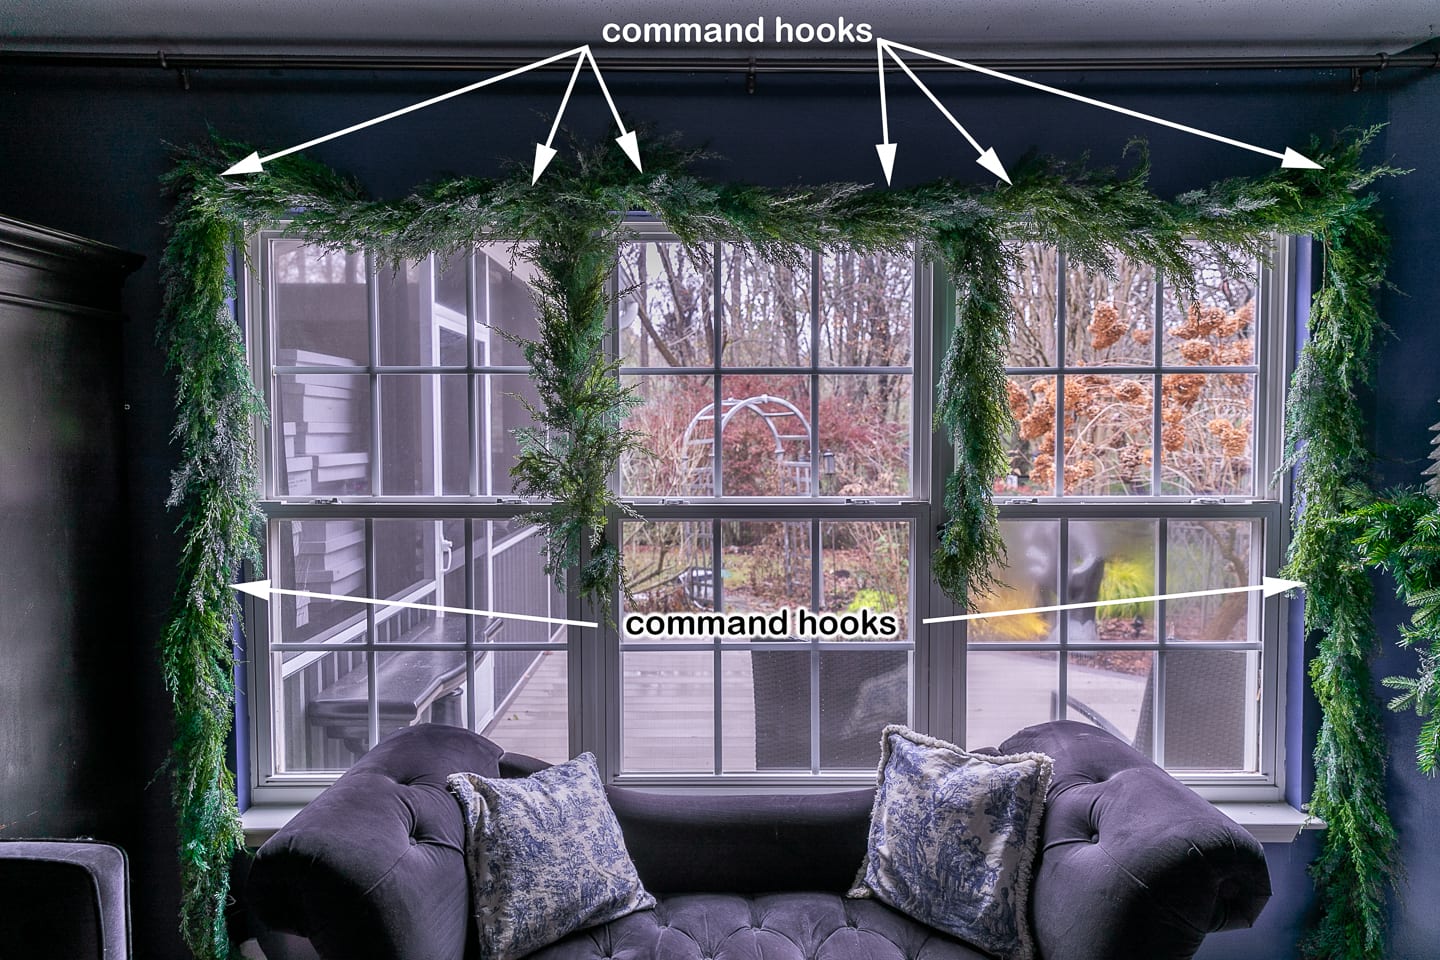 Command hook locations for hanging a garland over a window